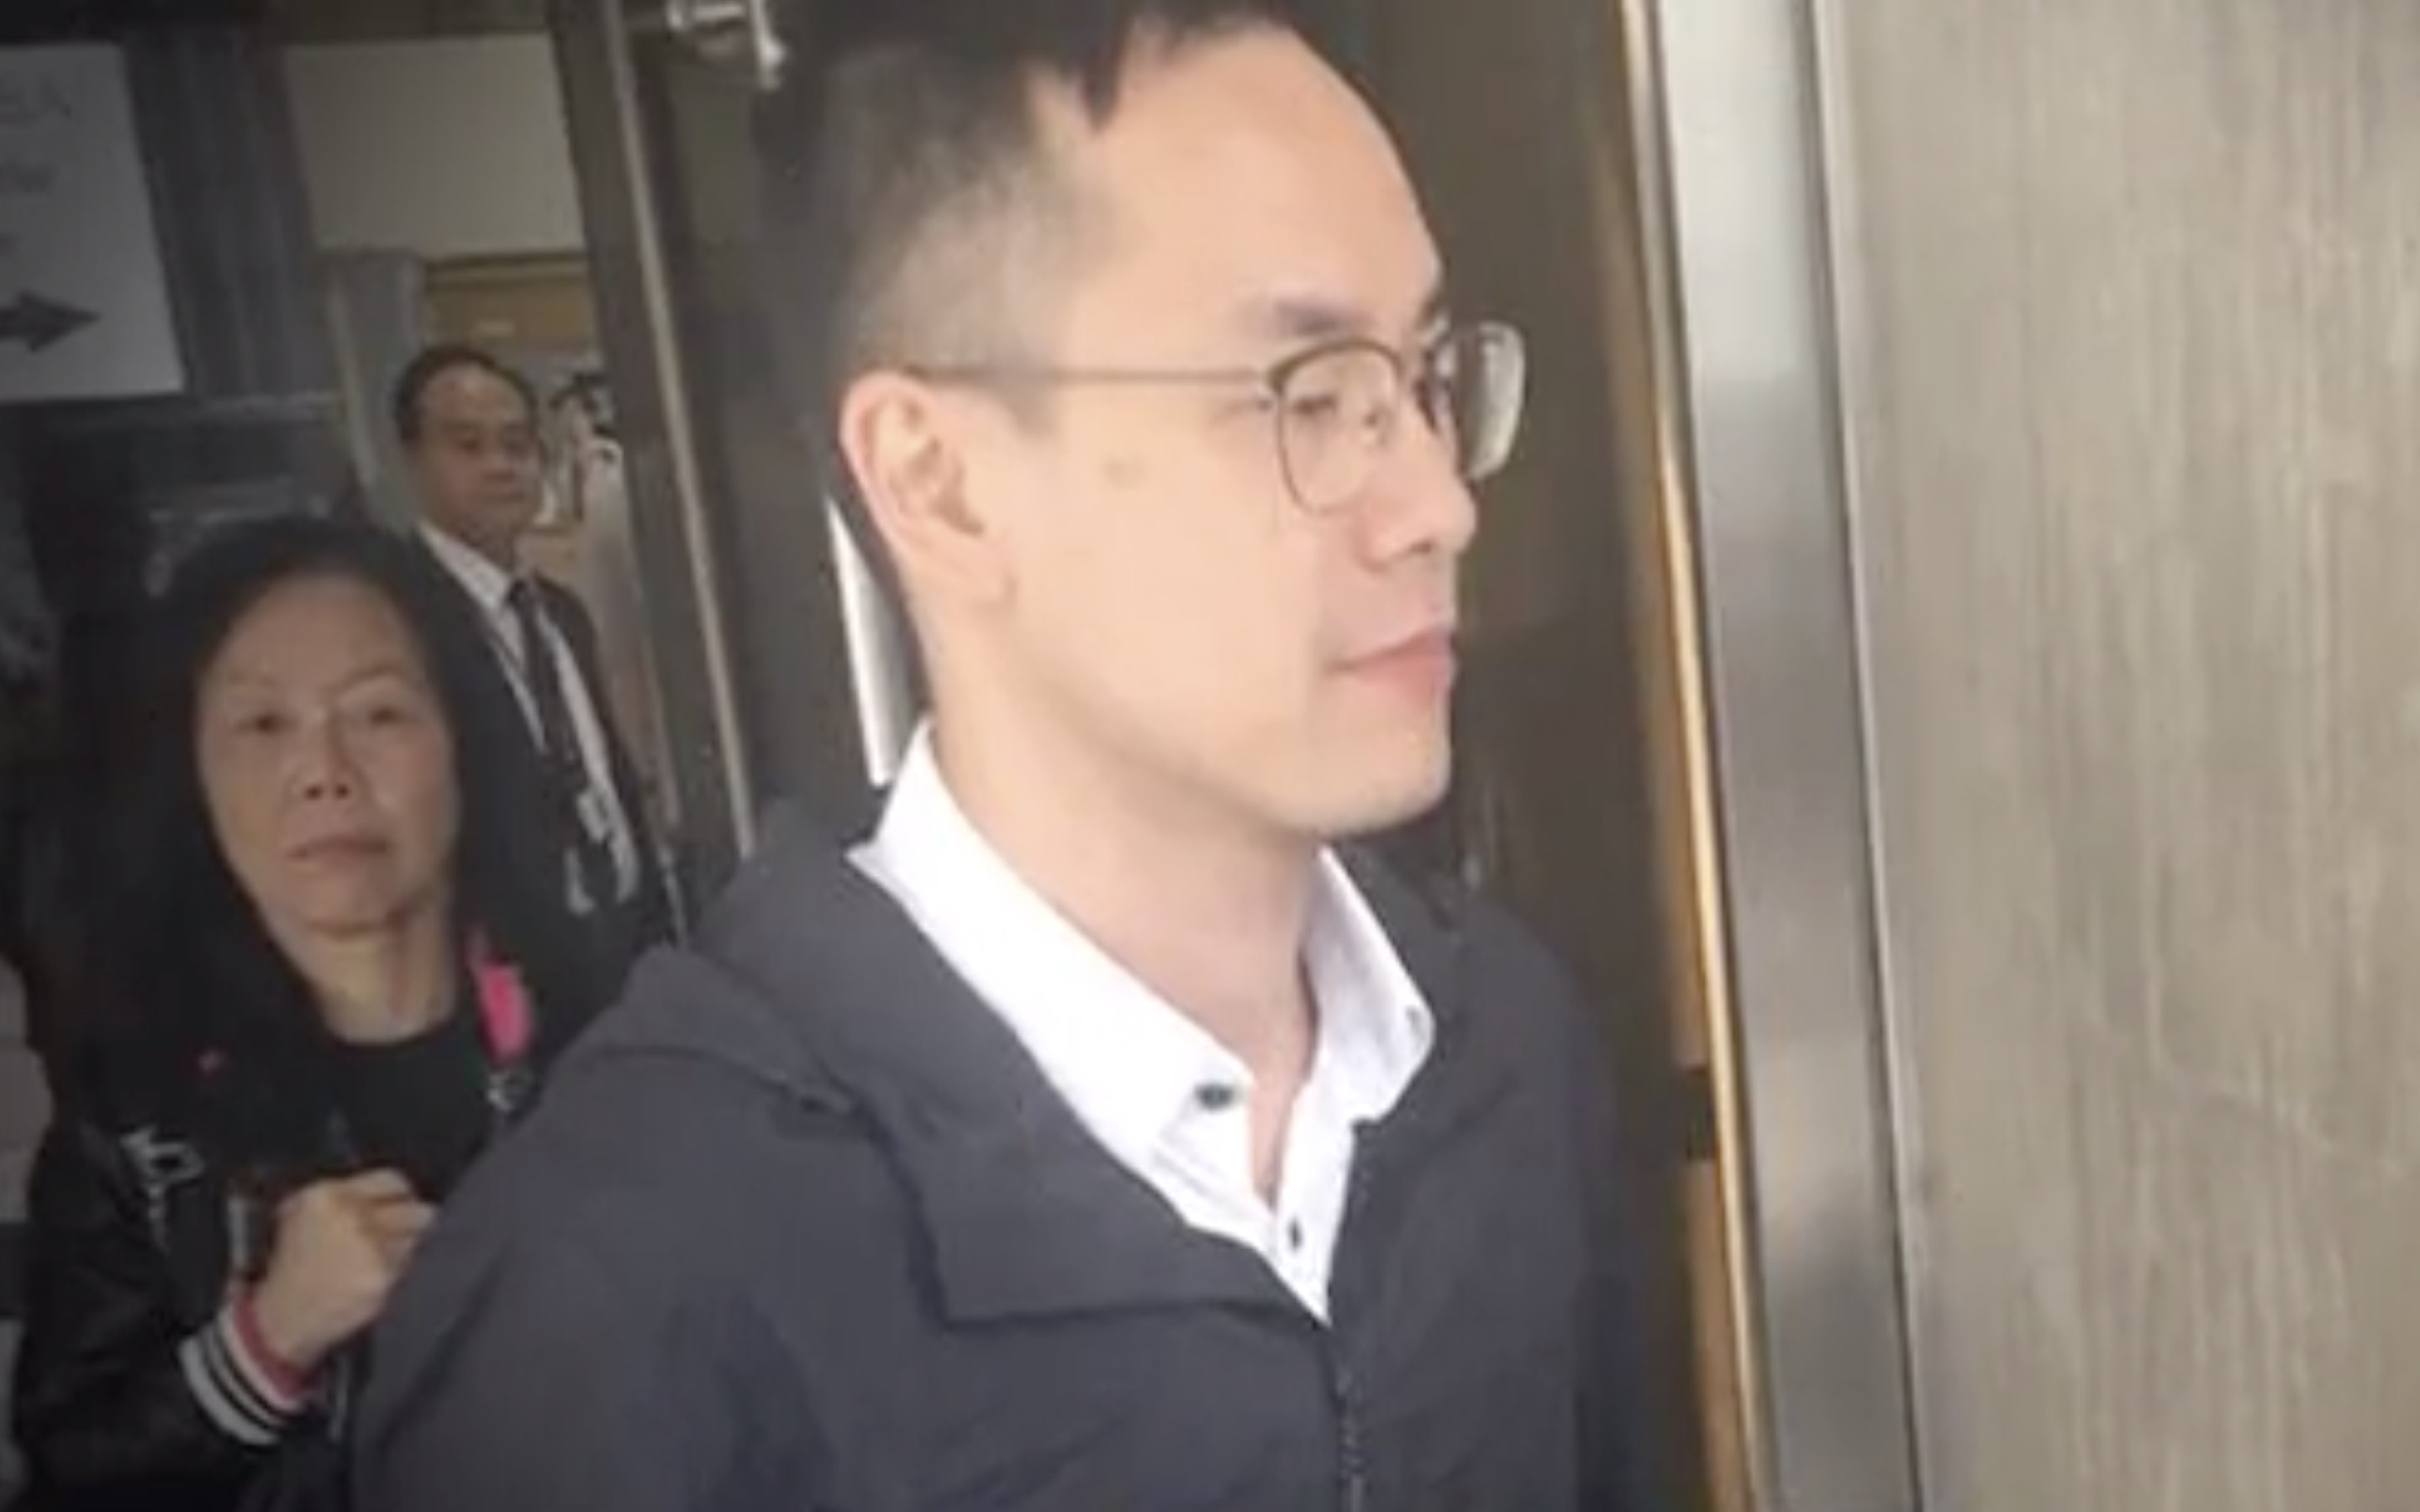 Uber driver Lam Cheuk-yin at a previous court appearance. Screengrab via Apple Daily.